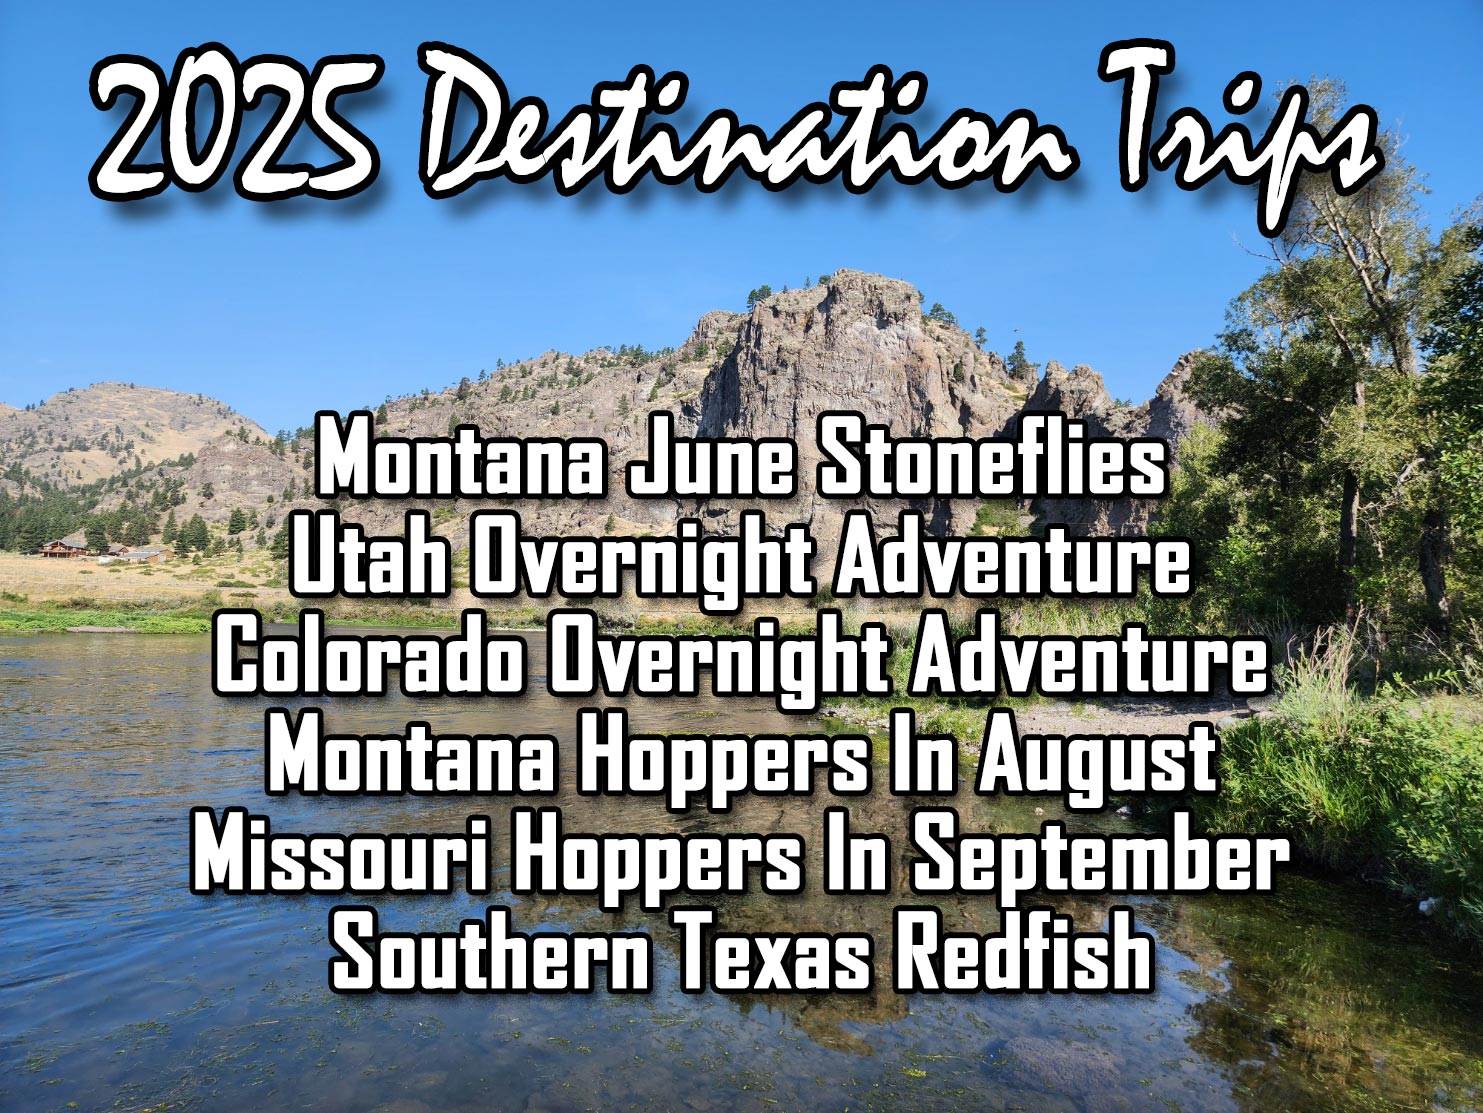 We Have Several Unique Trips Planned For 2025. Montana Stoneflies And Hoppers. Overnight Camping On The Green River in Utah or Gunnison River In Colorado. Then Off To Southern Texas For Redfish.